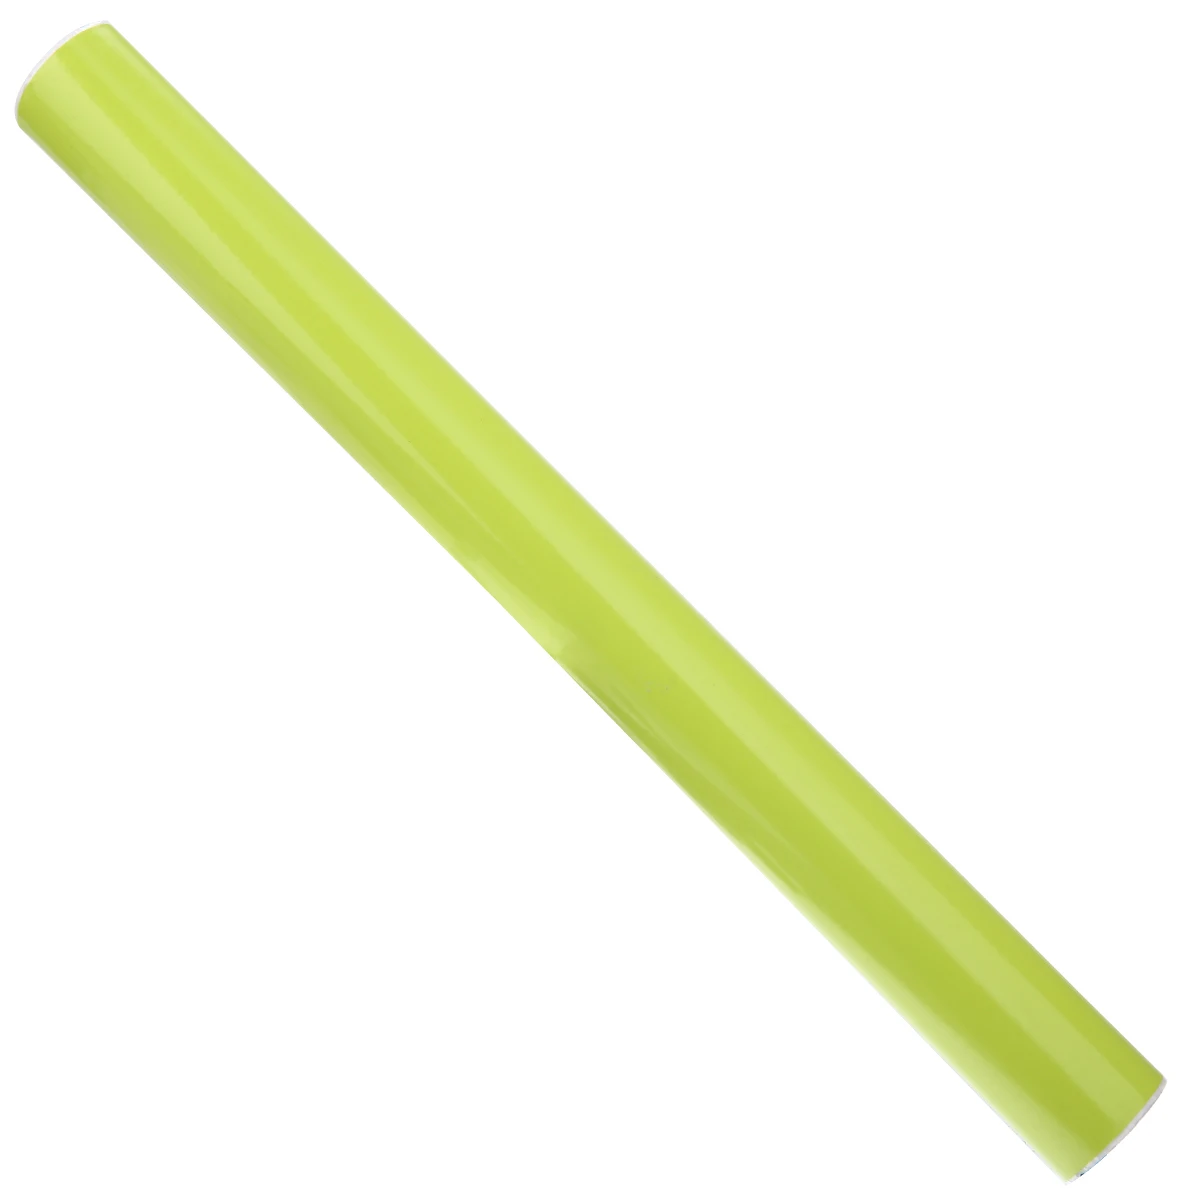 30x152cm Neon Yellow Car Vinyl Foil Film High Quality Wrap Roll Sticker Decal For Vehicle Decoration